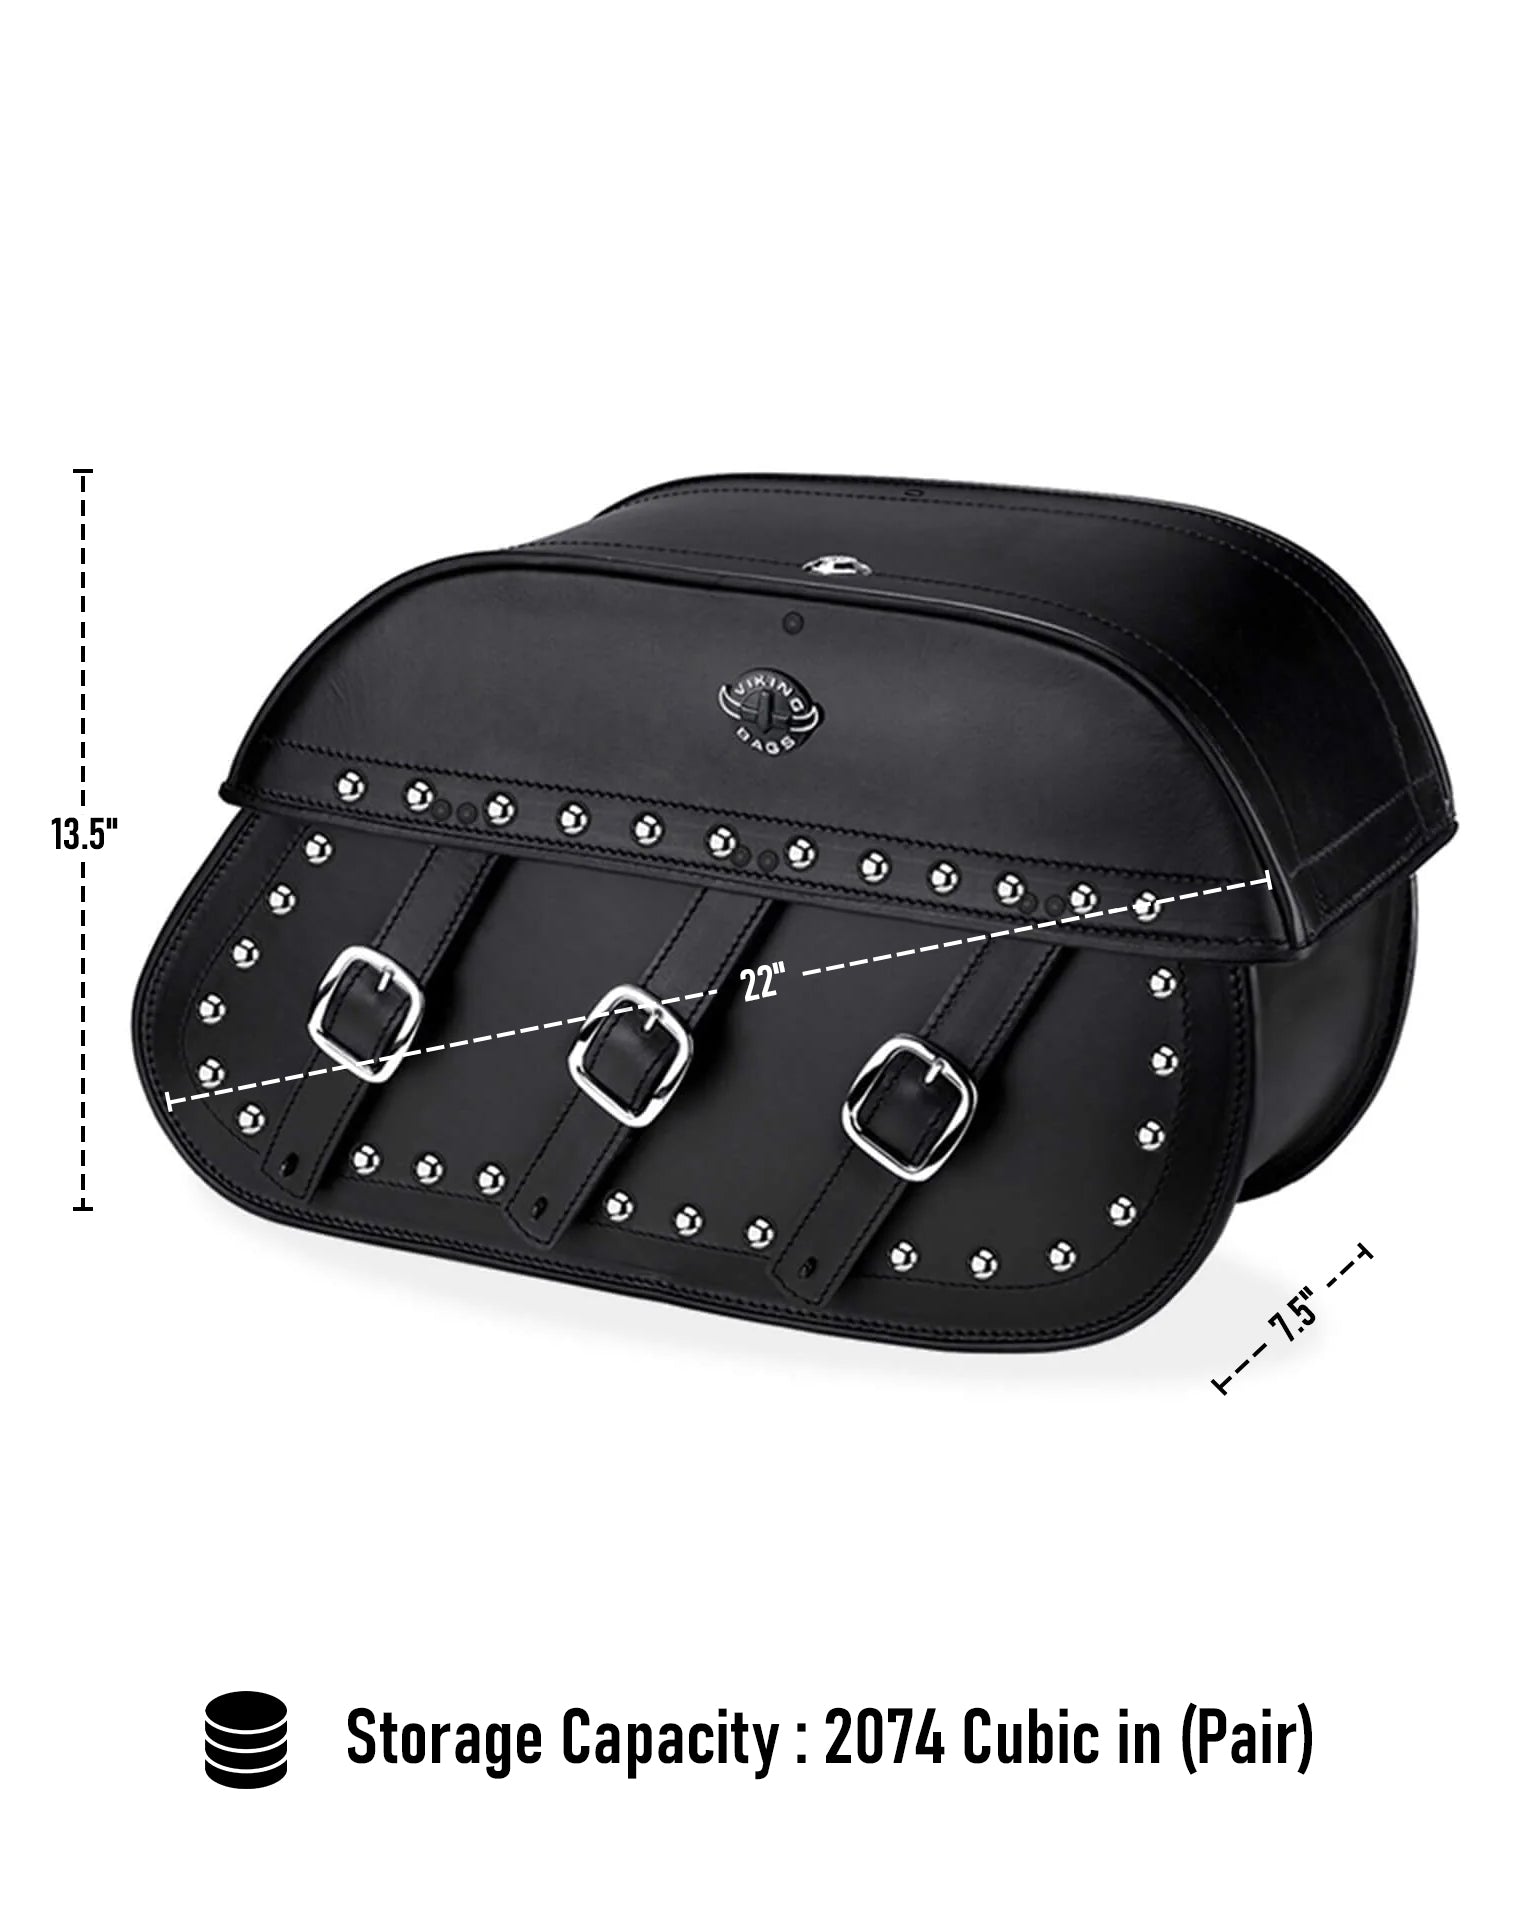 Viking Trianon Extra Large Suzuki Boulevard C90 Vl1500 Studded Leather Motorcycle Saddlebags Can Store Your Ridings Gears